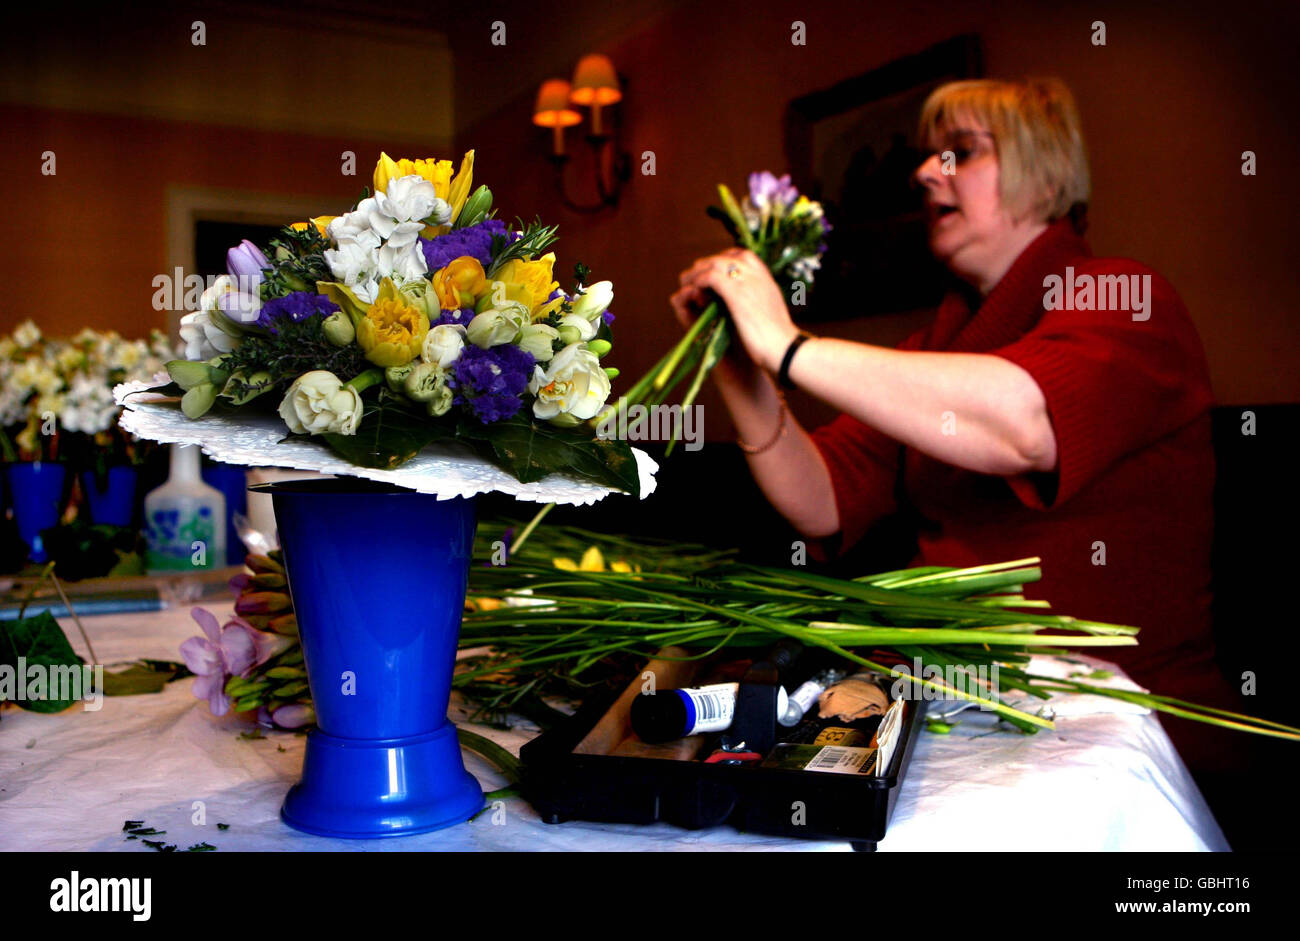 Rosie Mason, 55, the Royal Nosegay maker prepares the Queen's Nosegays at the Angel Hotel in Bury St Edmunds. The posies will be carried by the Royals during the Maundy Thursday Service at Bury St Edmunds Cathedral tomorrow, when Queen Elizabeth II will hand out Maundy coins. Stock Photo